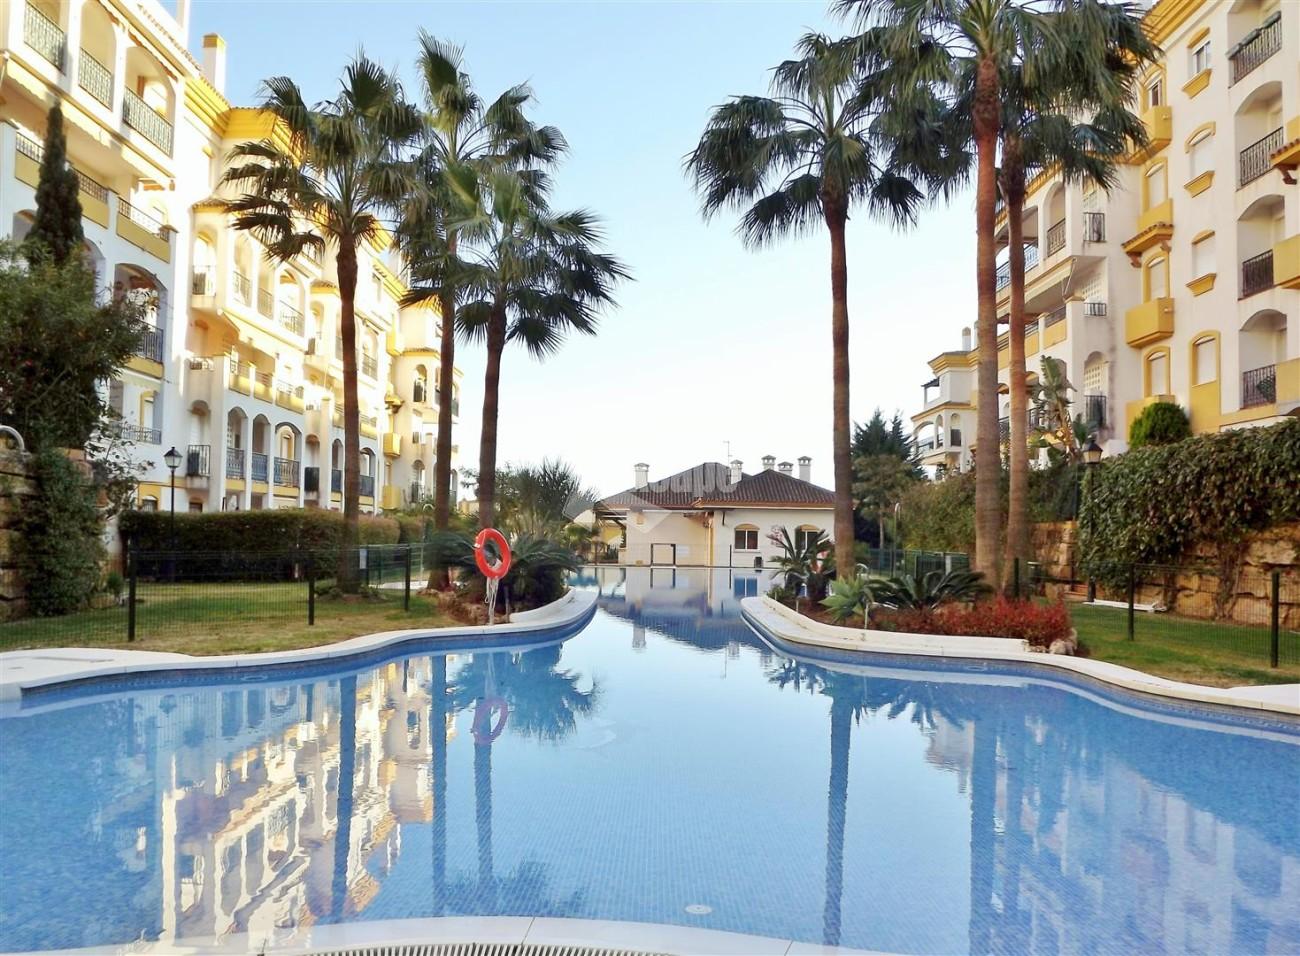 A5252 Apartment Golden Mile Marbella (11) (Large)